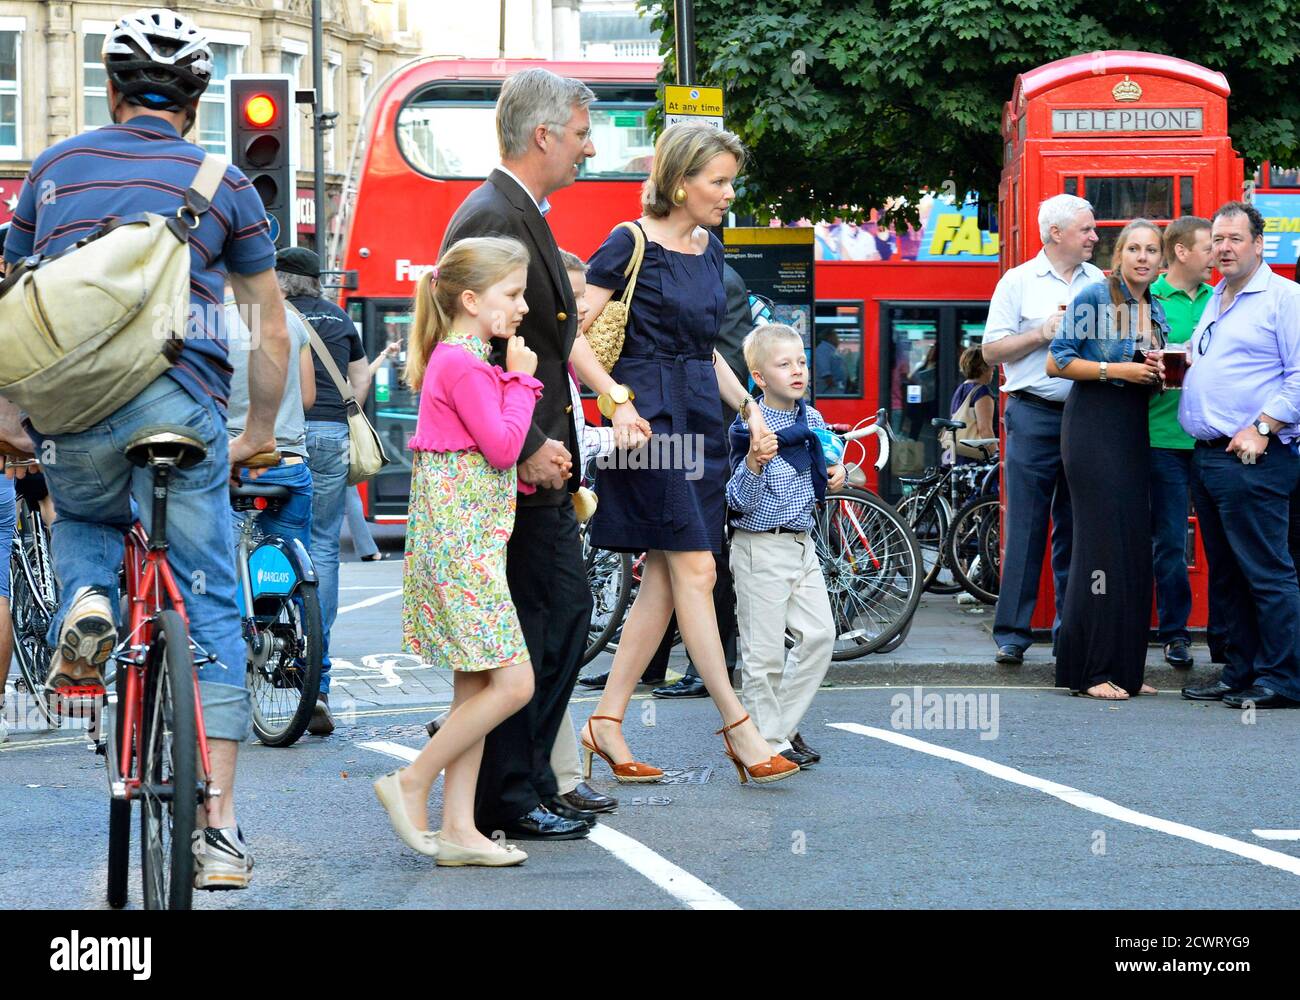 (L-R) Belgium's Princess Elisabeth, Crown Prince Philippe, Prince Gabriel, Crown Princess Mathilde and Prince Emmanuel visit central London ahead of the London 2012 Olympic Games July 26, 2012. Picture taken on July 26, 2012.                REUTERS/Benoit Doppagne/Pool    (BRITAIN  - Tags: SPORT ROYALS POLITICS SPORT OLYMPICS) Stock Photo